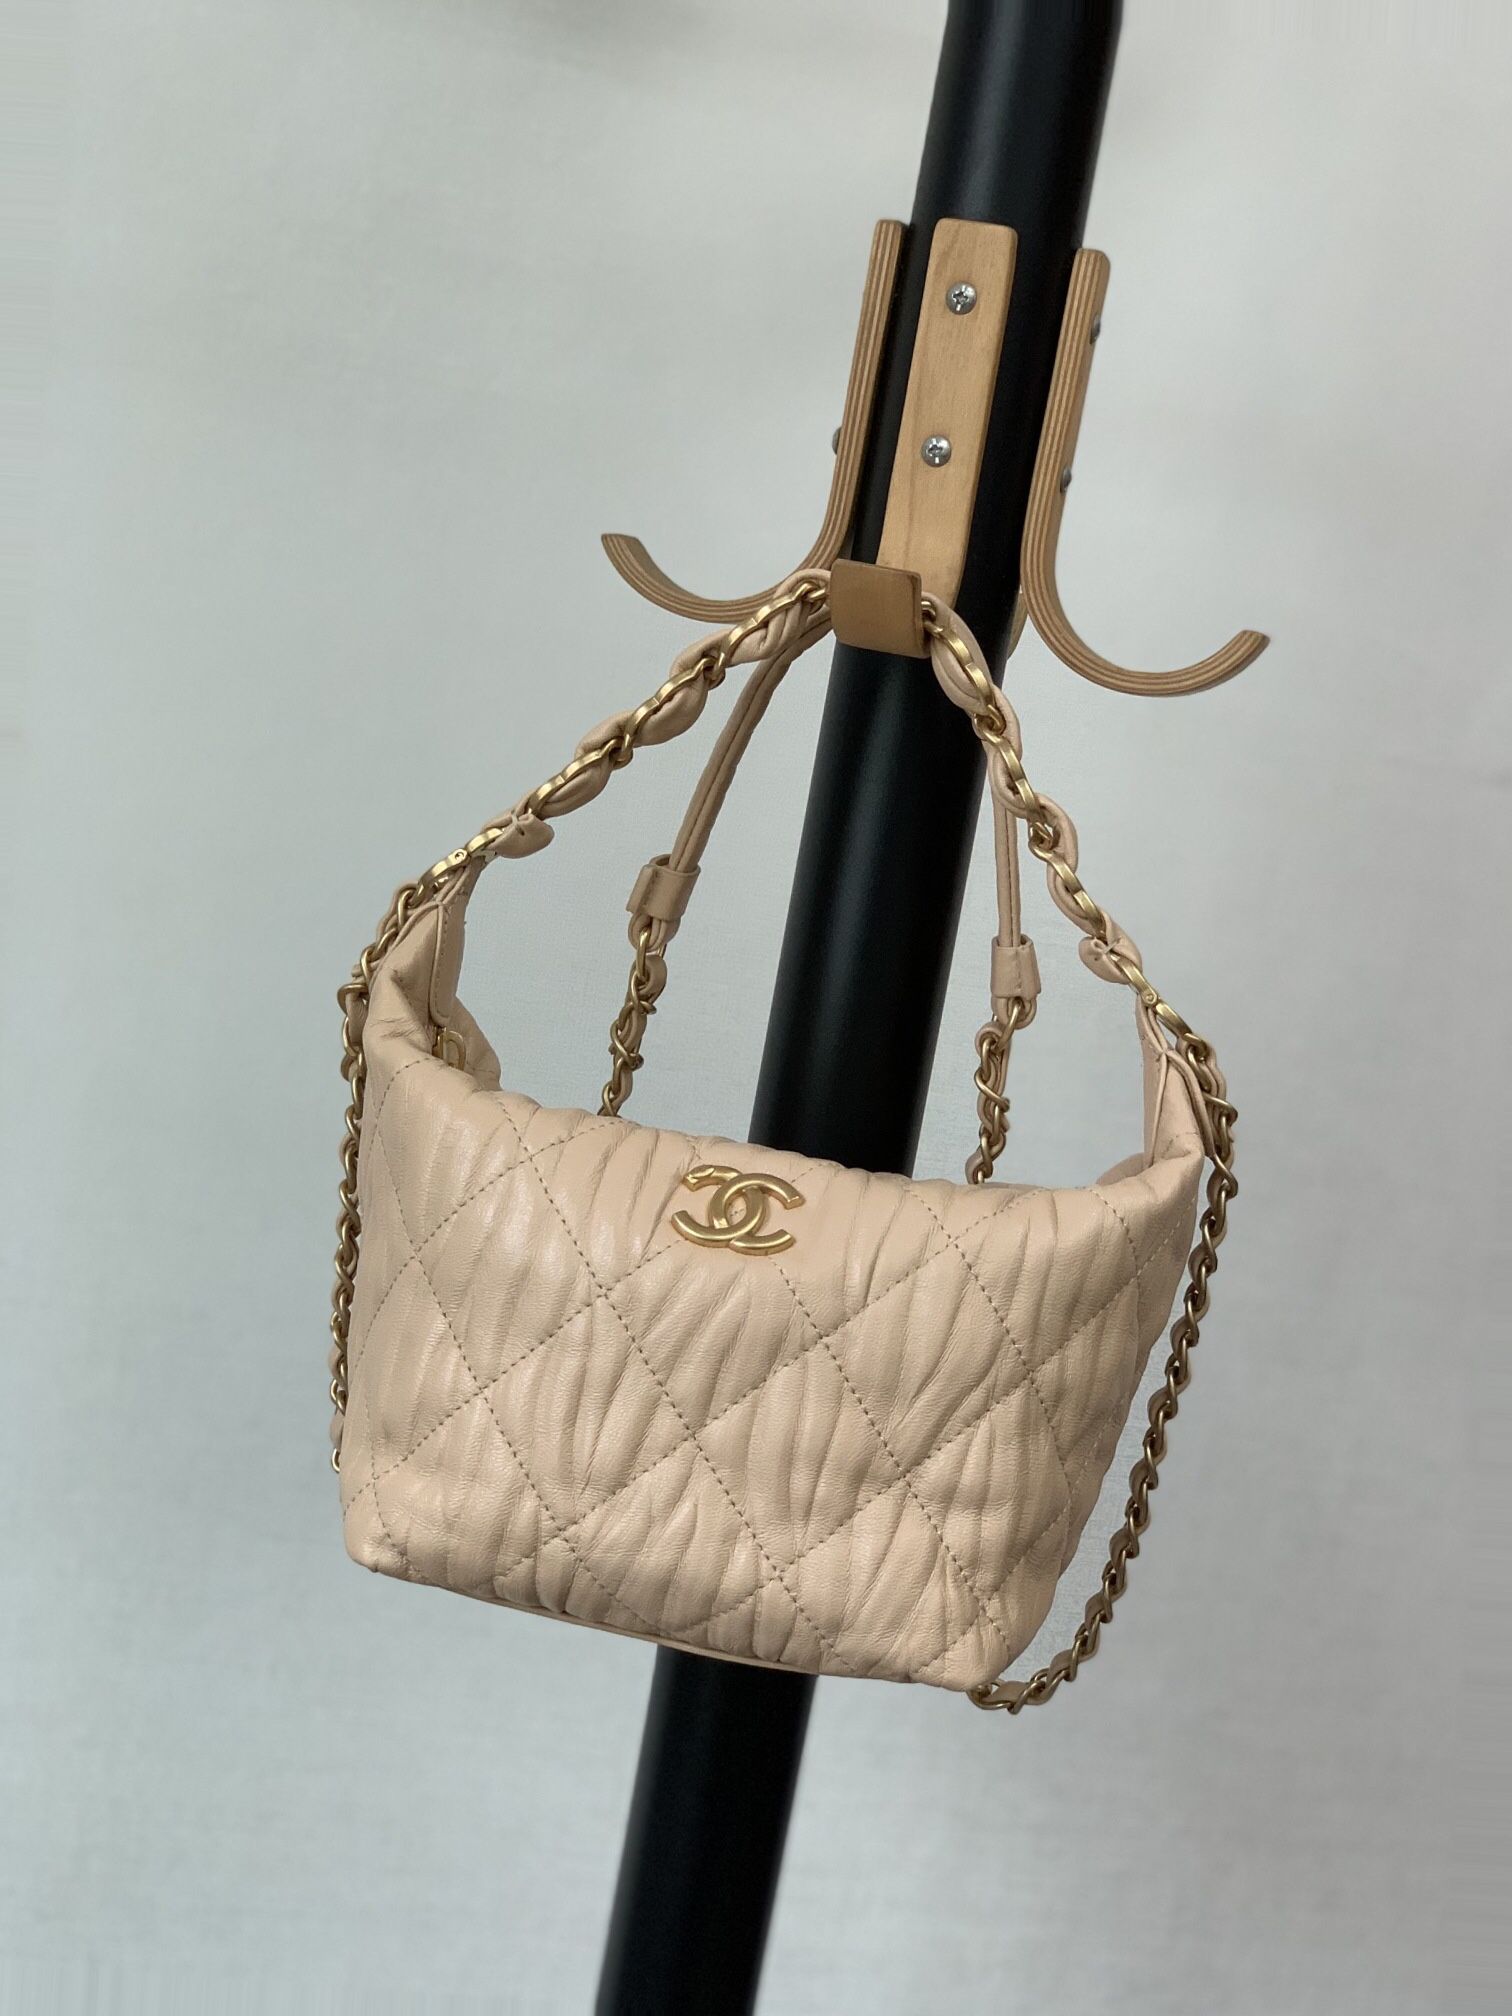 Chanel Hobo Bags for Sale in Los Angeles, CA - OfferUp